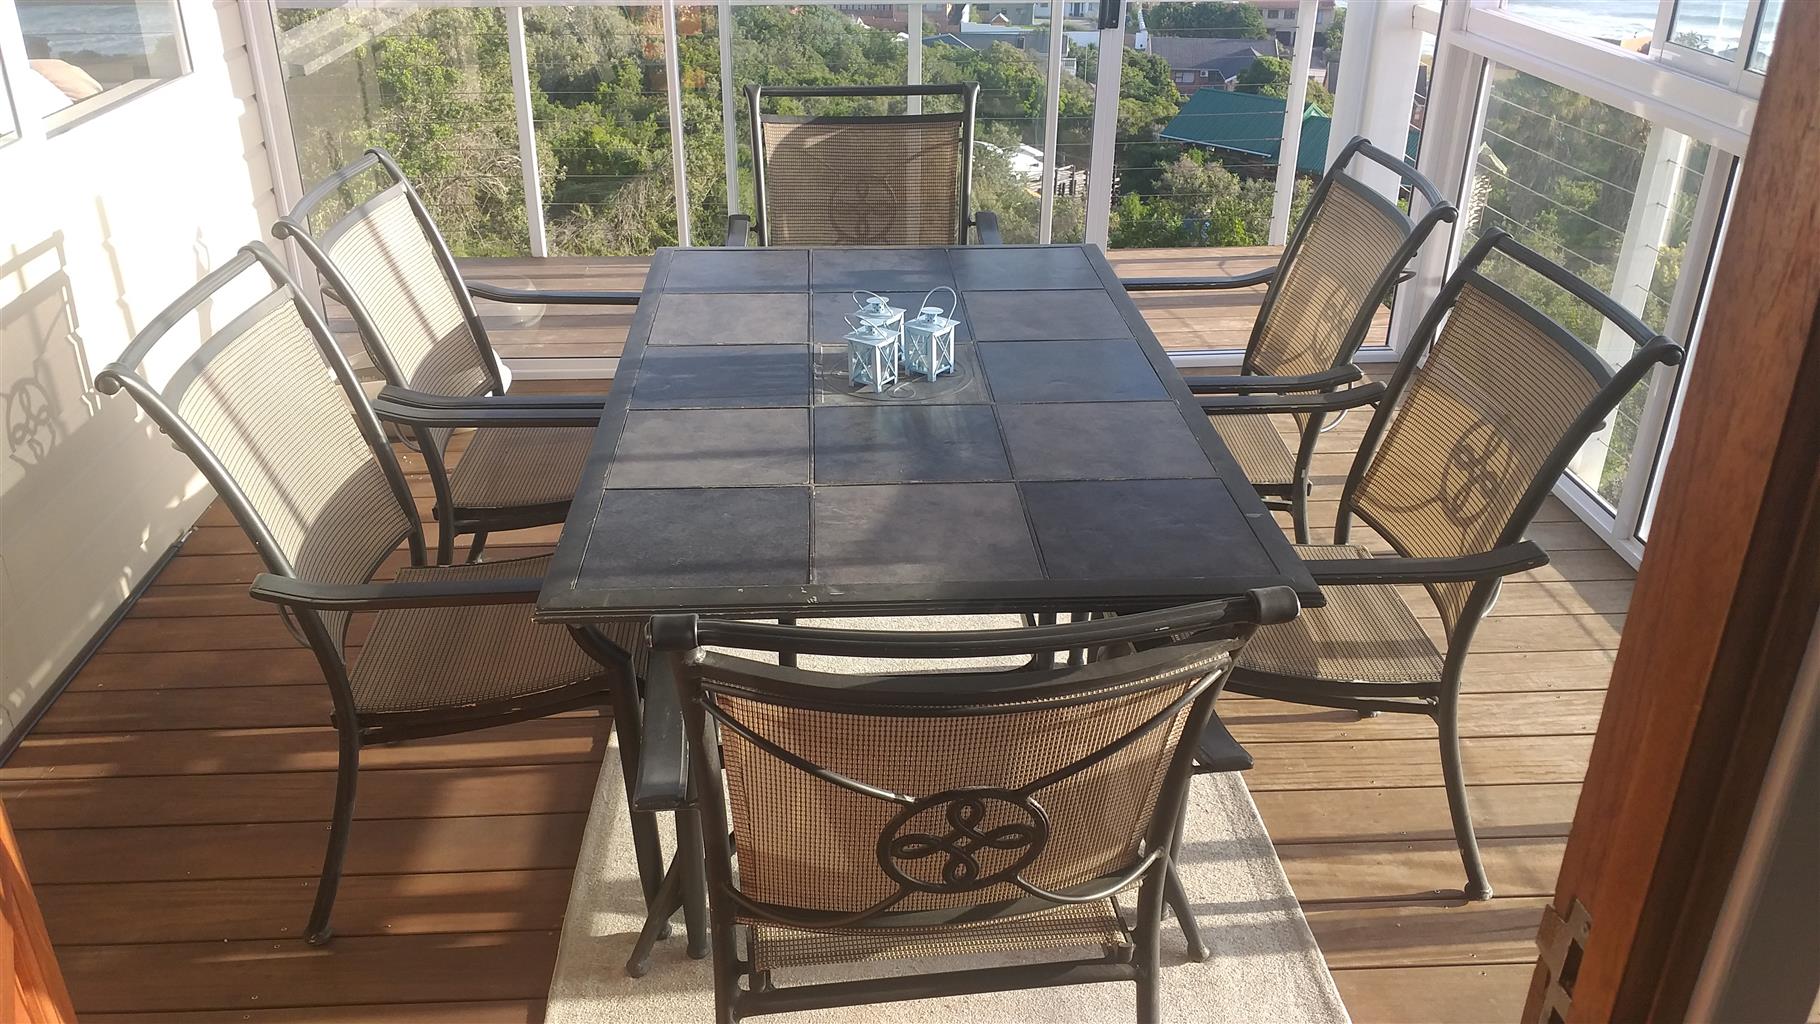 6 SEATER PATIO TABLE FOR SALE